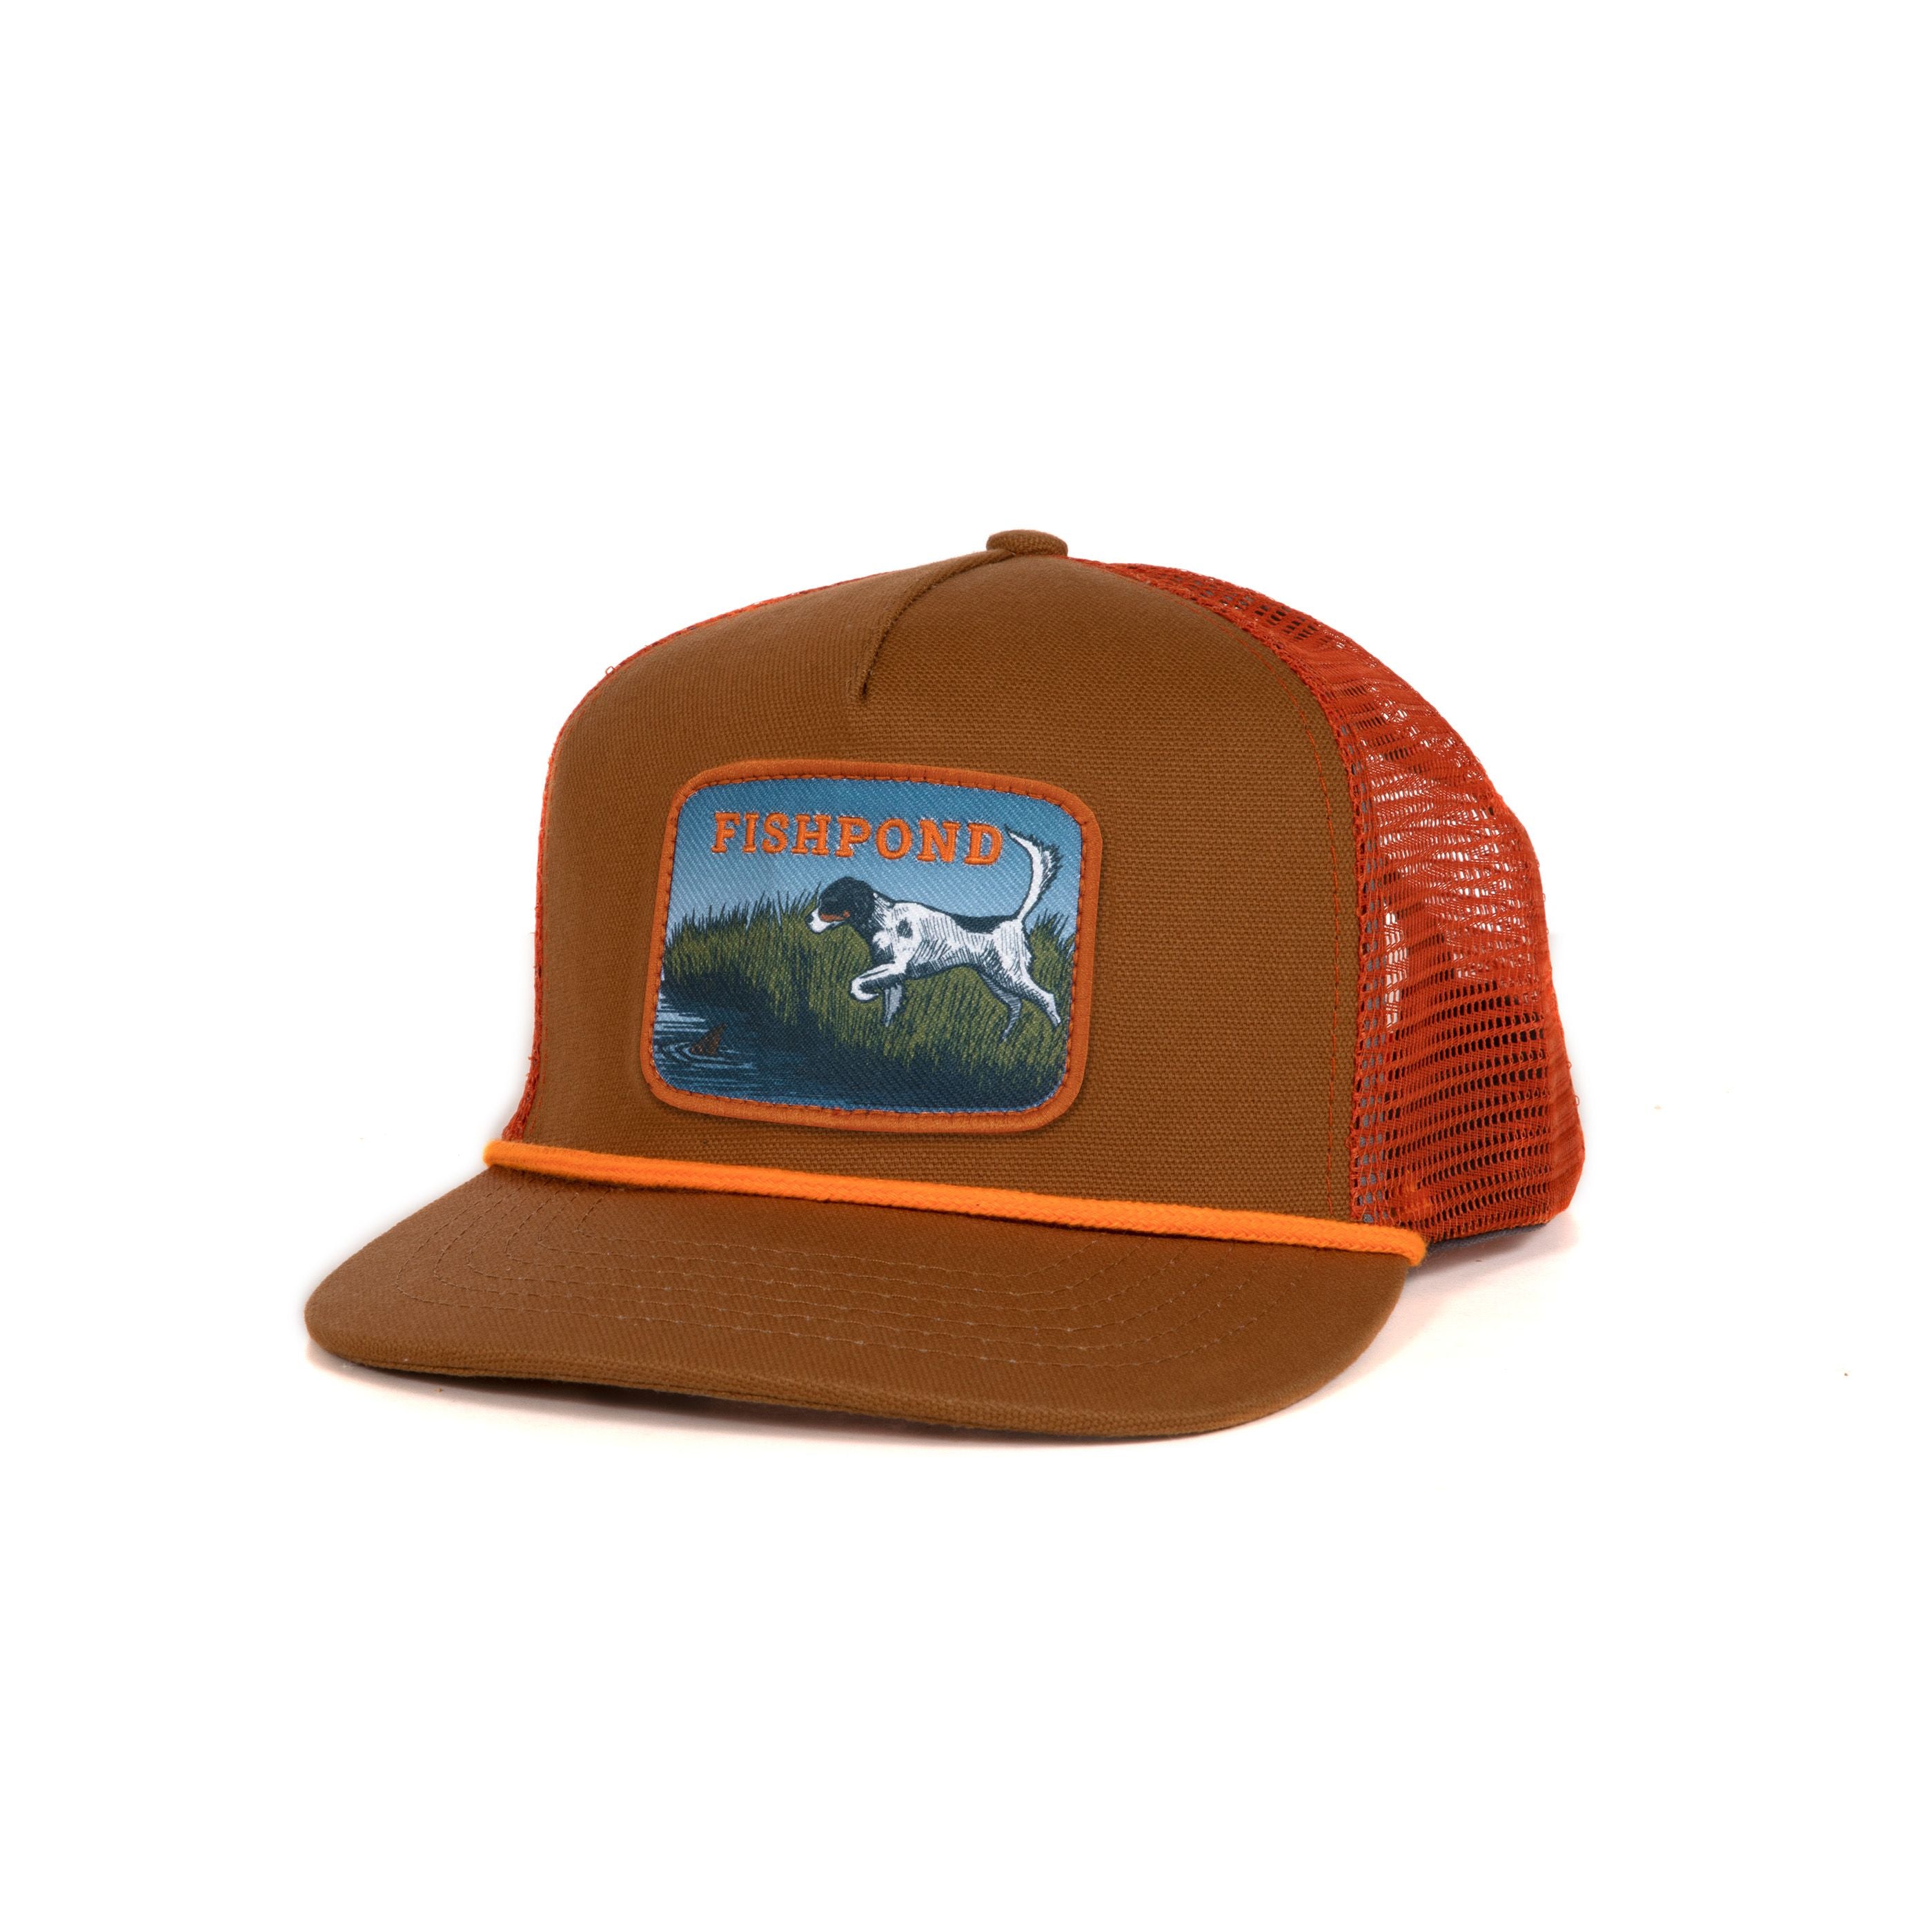 Fishpond Pescado Trucker Hat, Buy Fishpond Fly Fishing Hats Online at